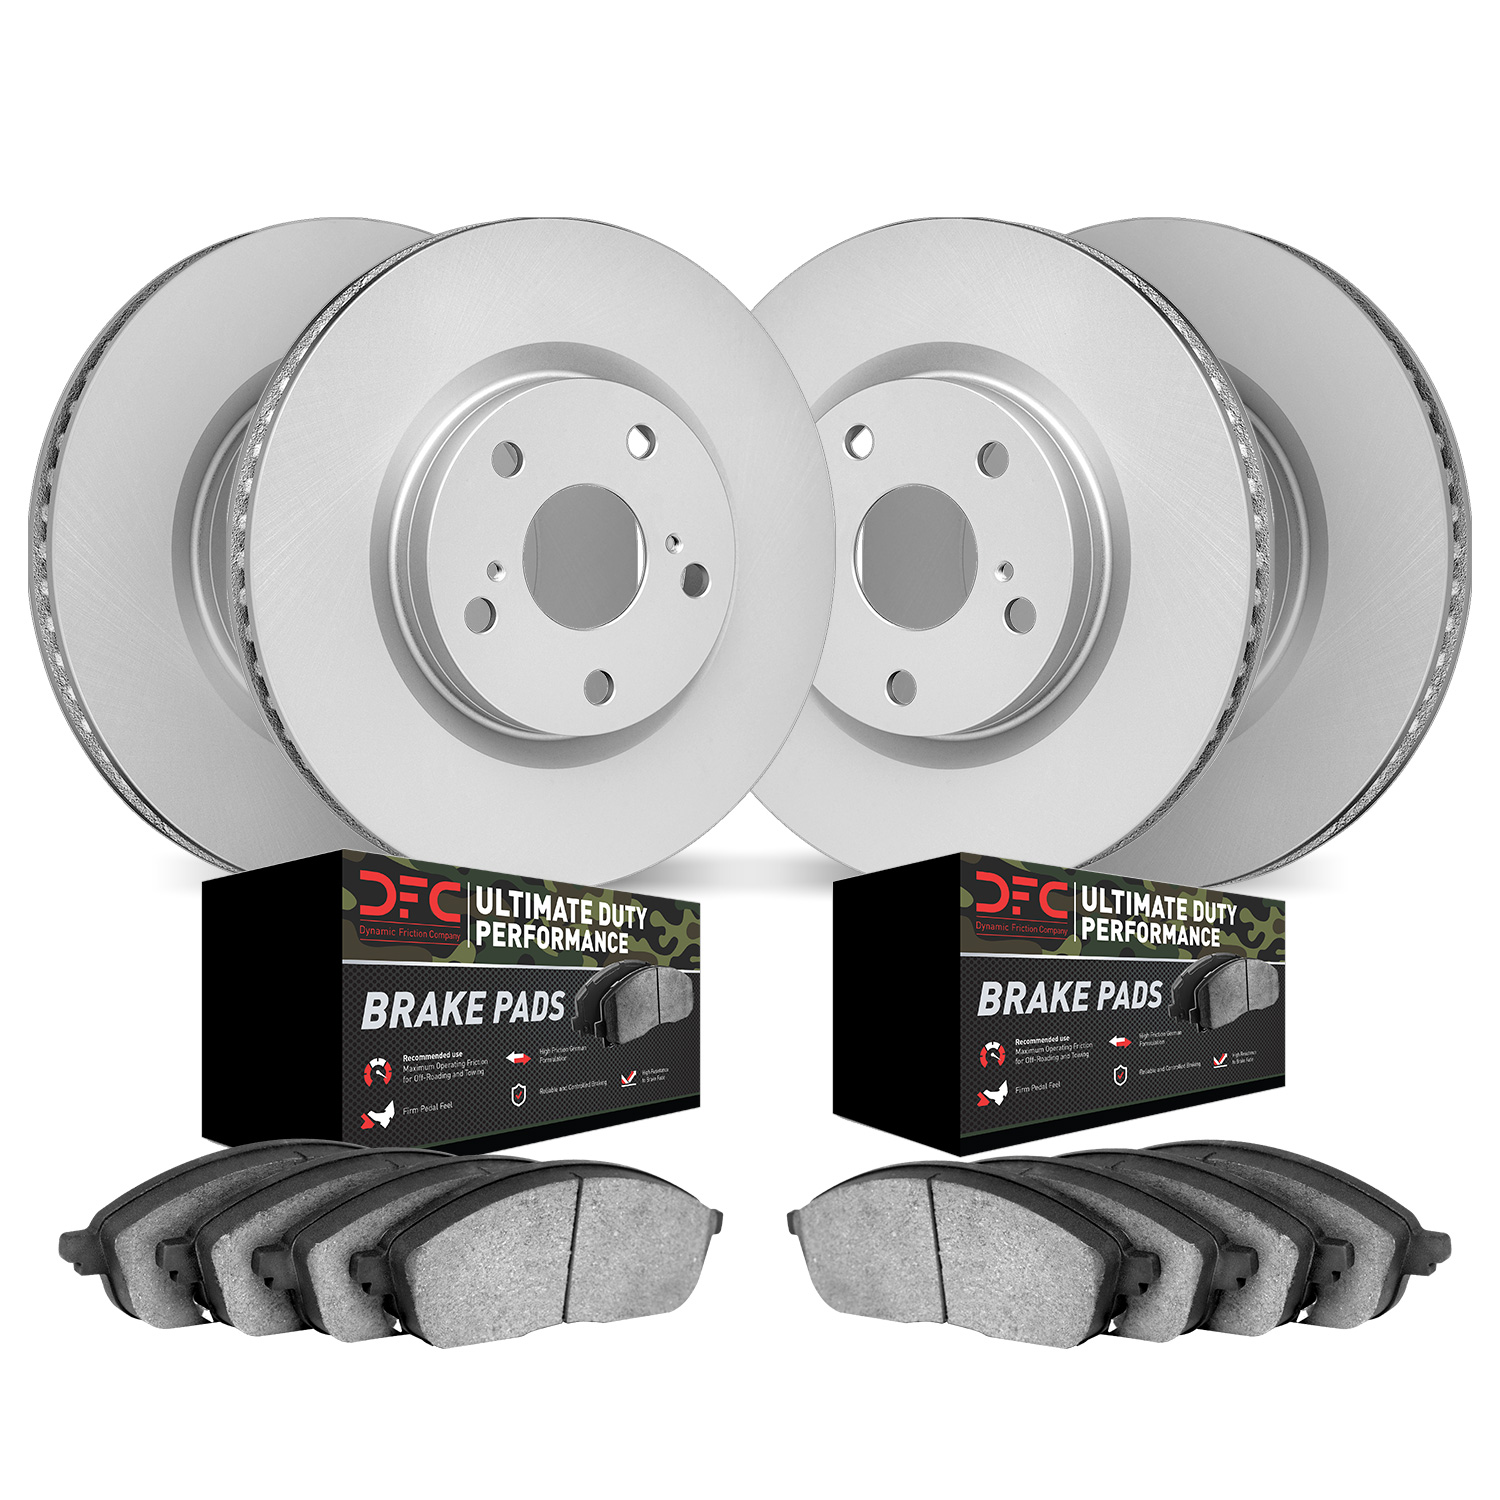 4404-76006 Geospec Brake Rotors with Ultimate-Duty Brake Pads Kit, Fits Select Lexus/Toyota/Scion, Position: Front and Rear